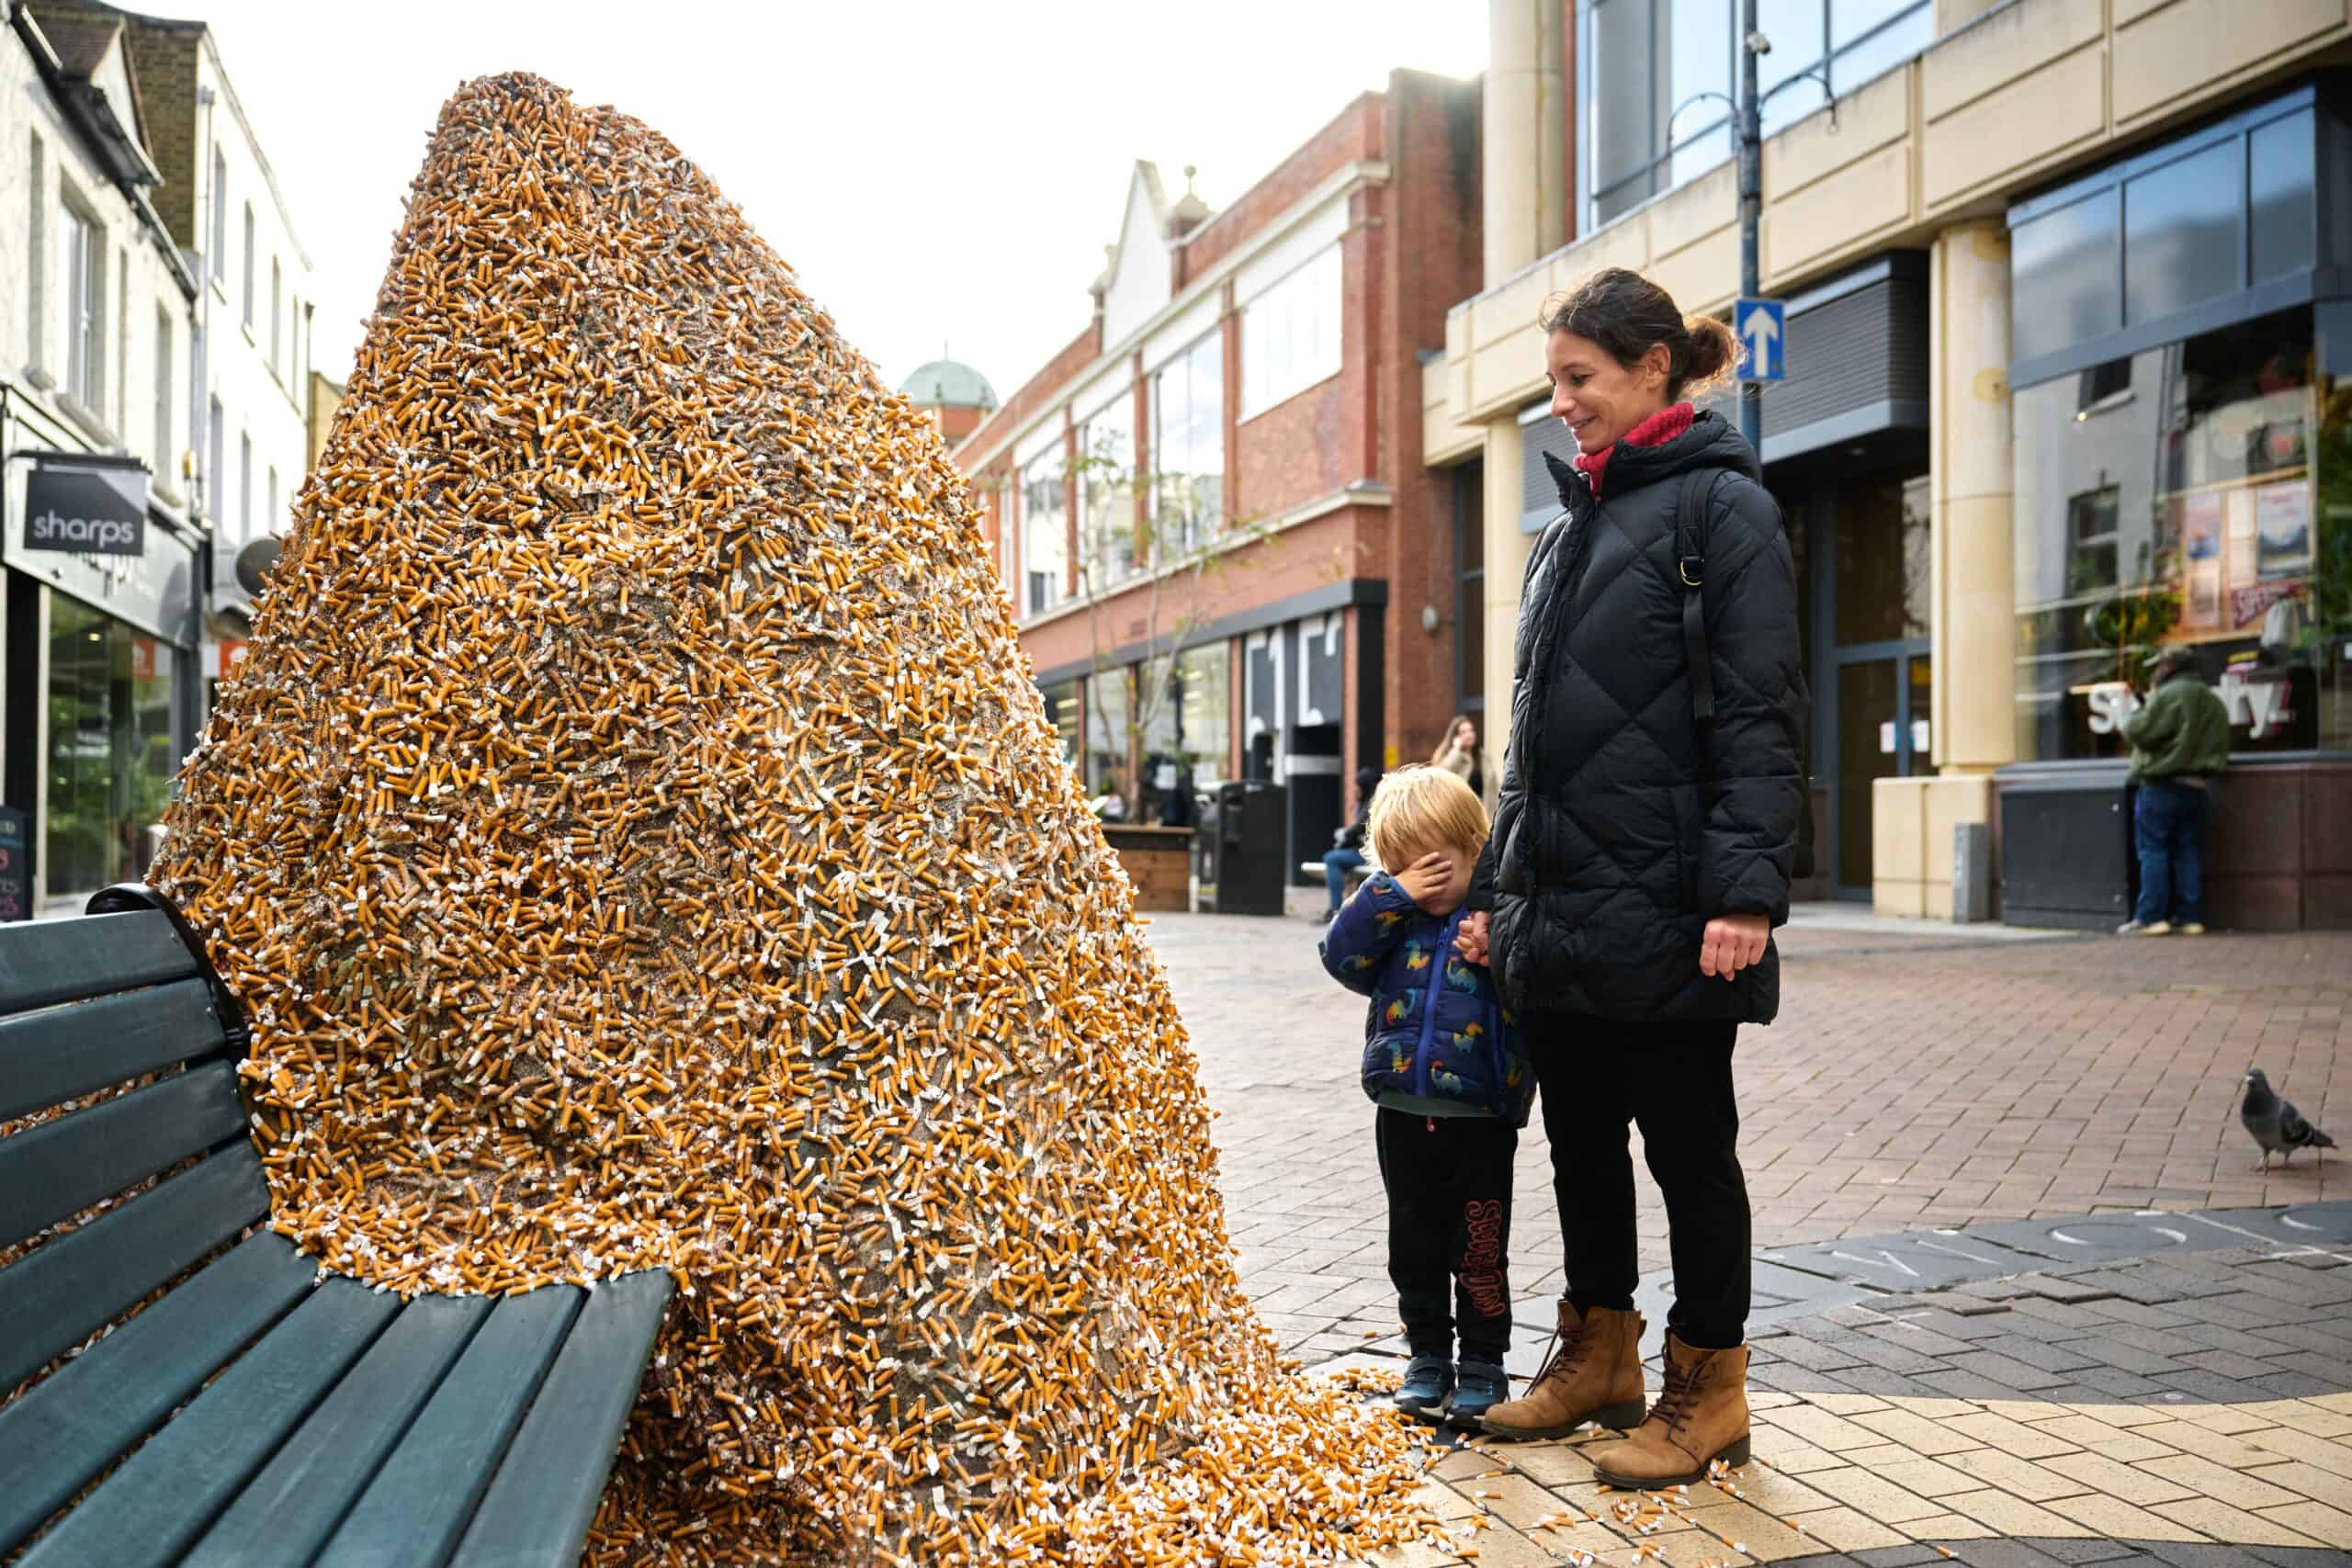 Whopping 225k cigarette butts dropped on UK high streets ‘every hour’